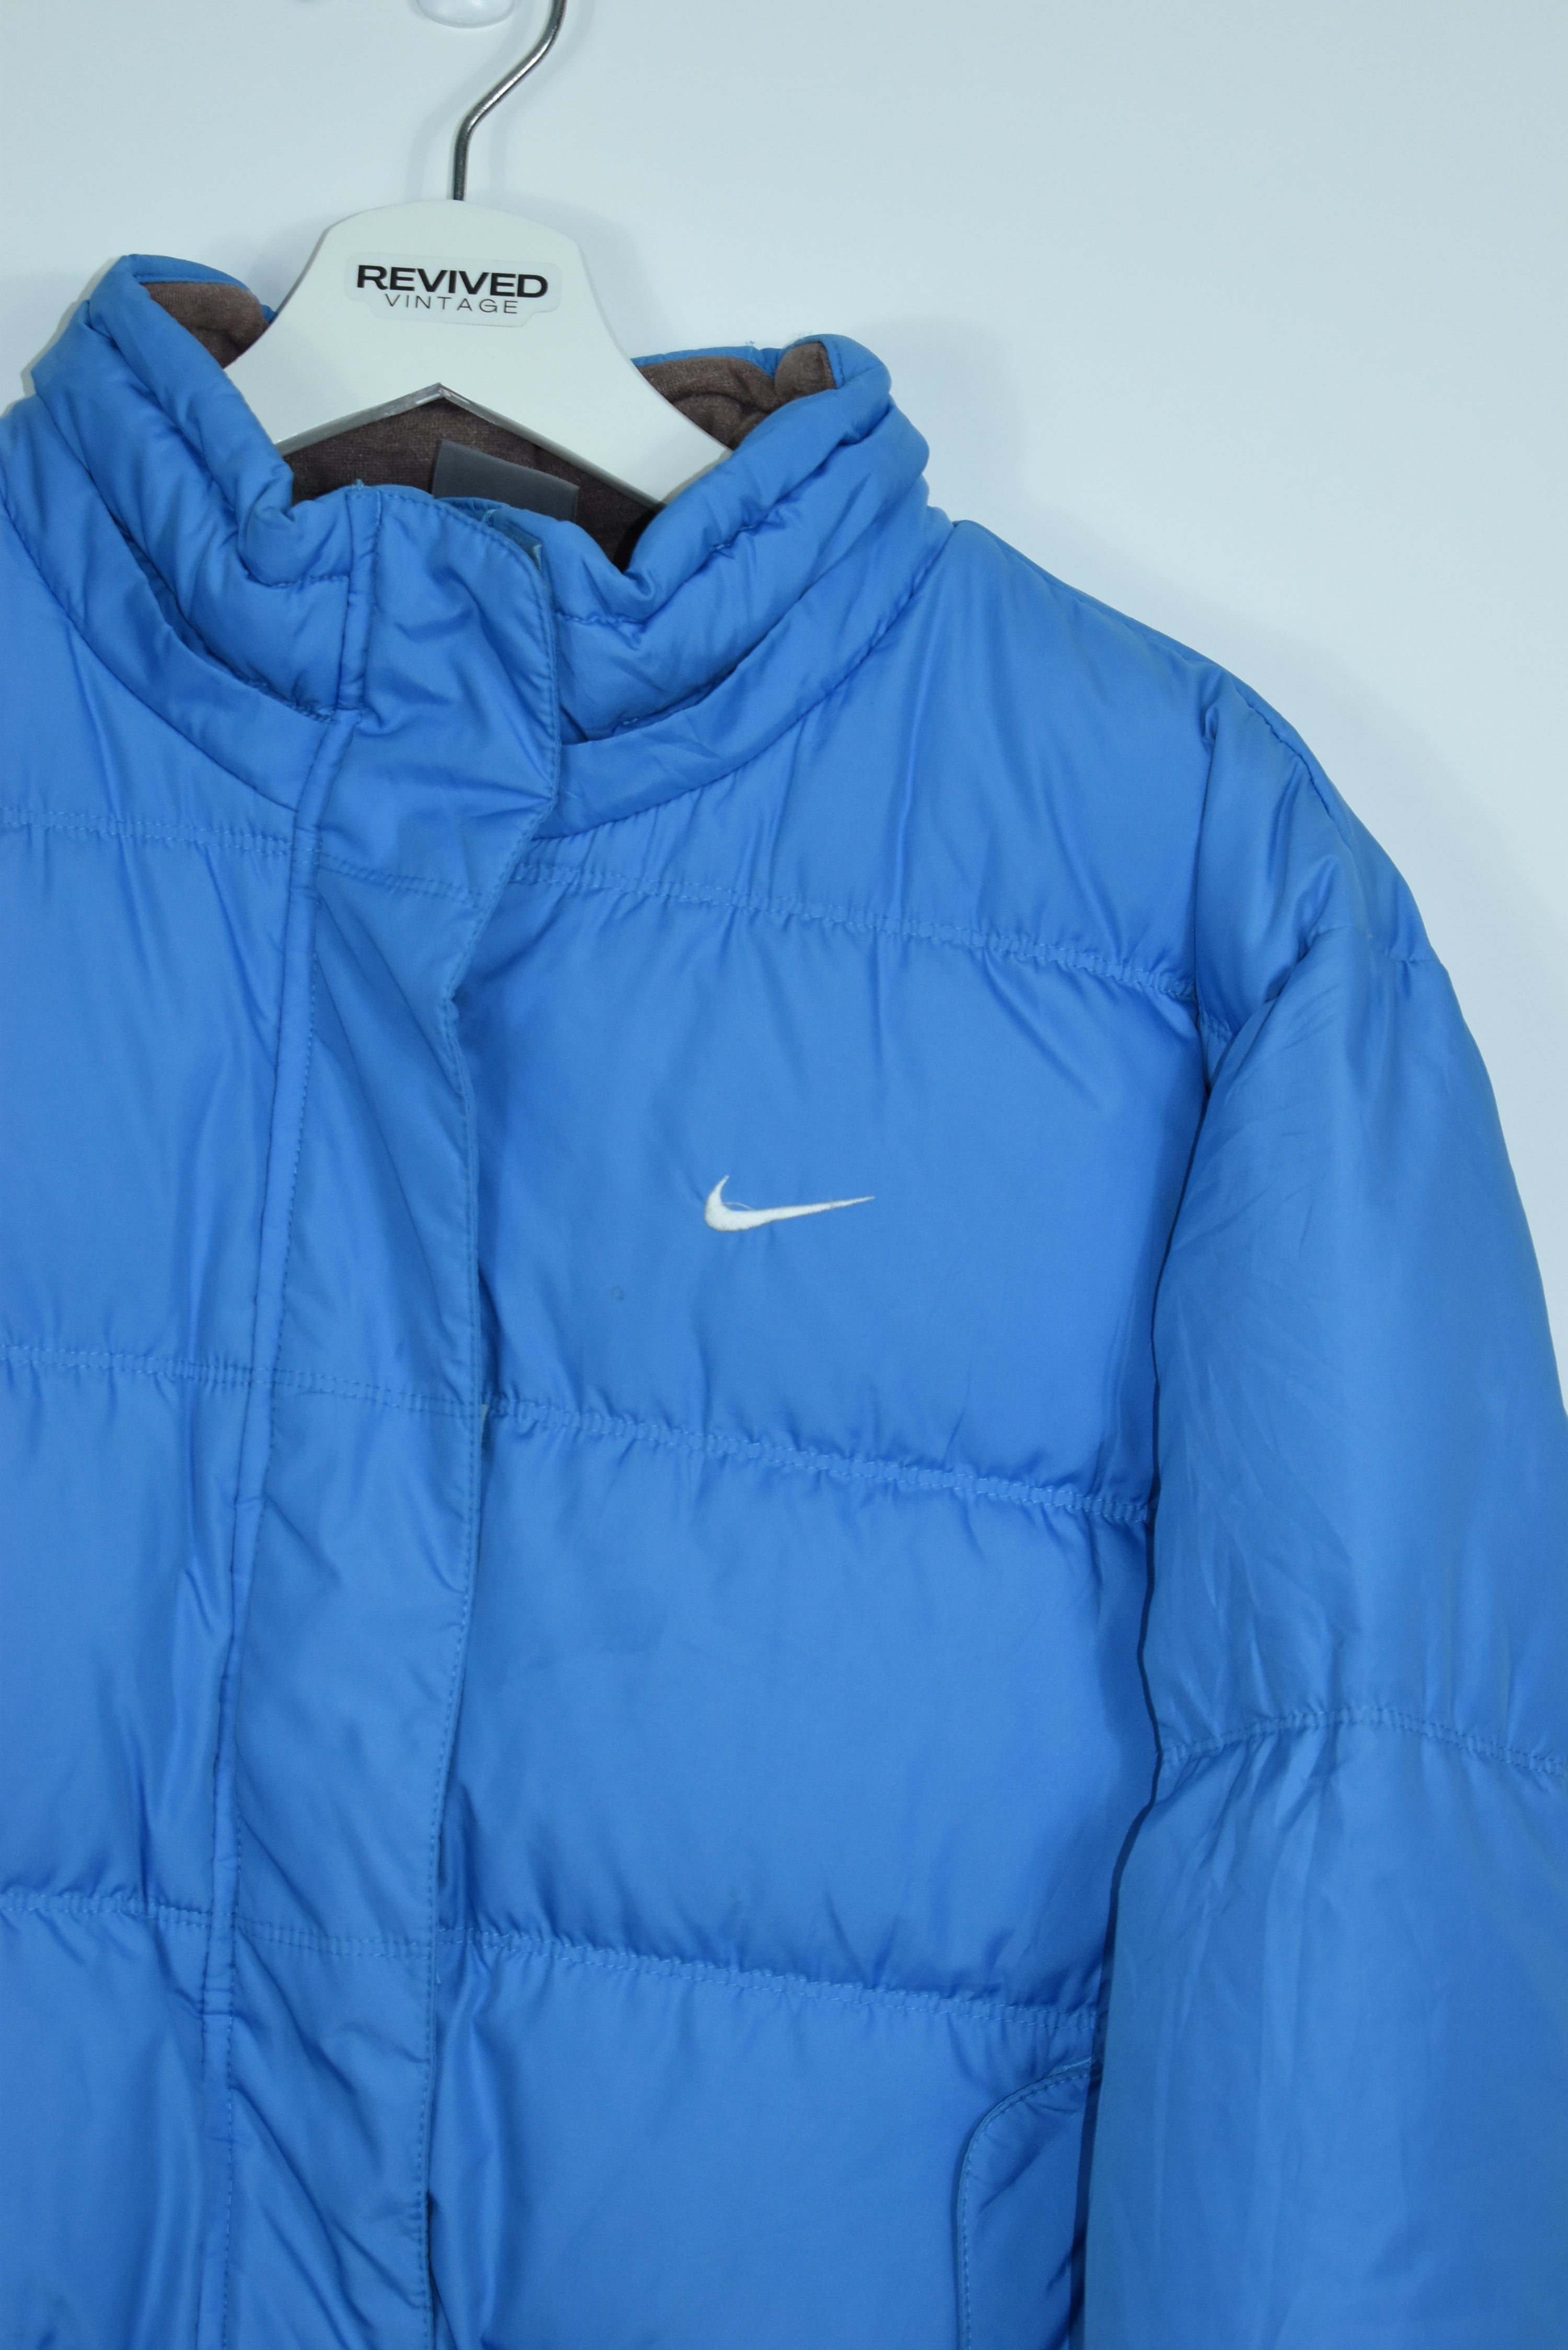 Vintage Nike Baby Blue Puffer Large (Womens)